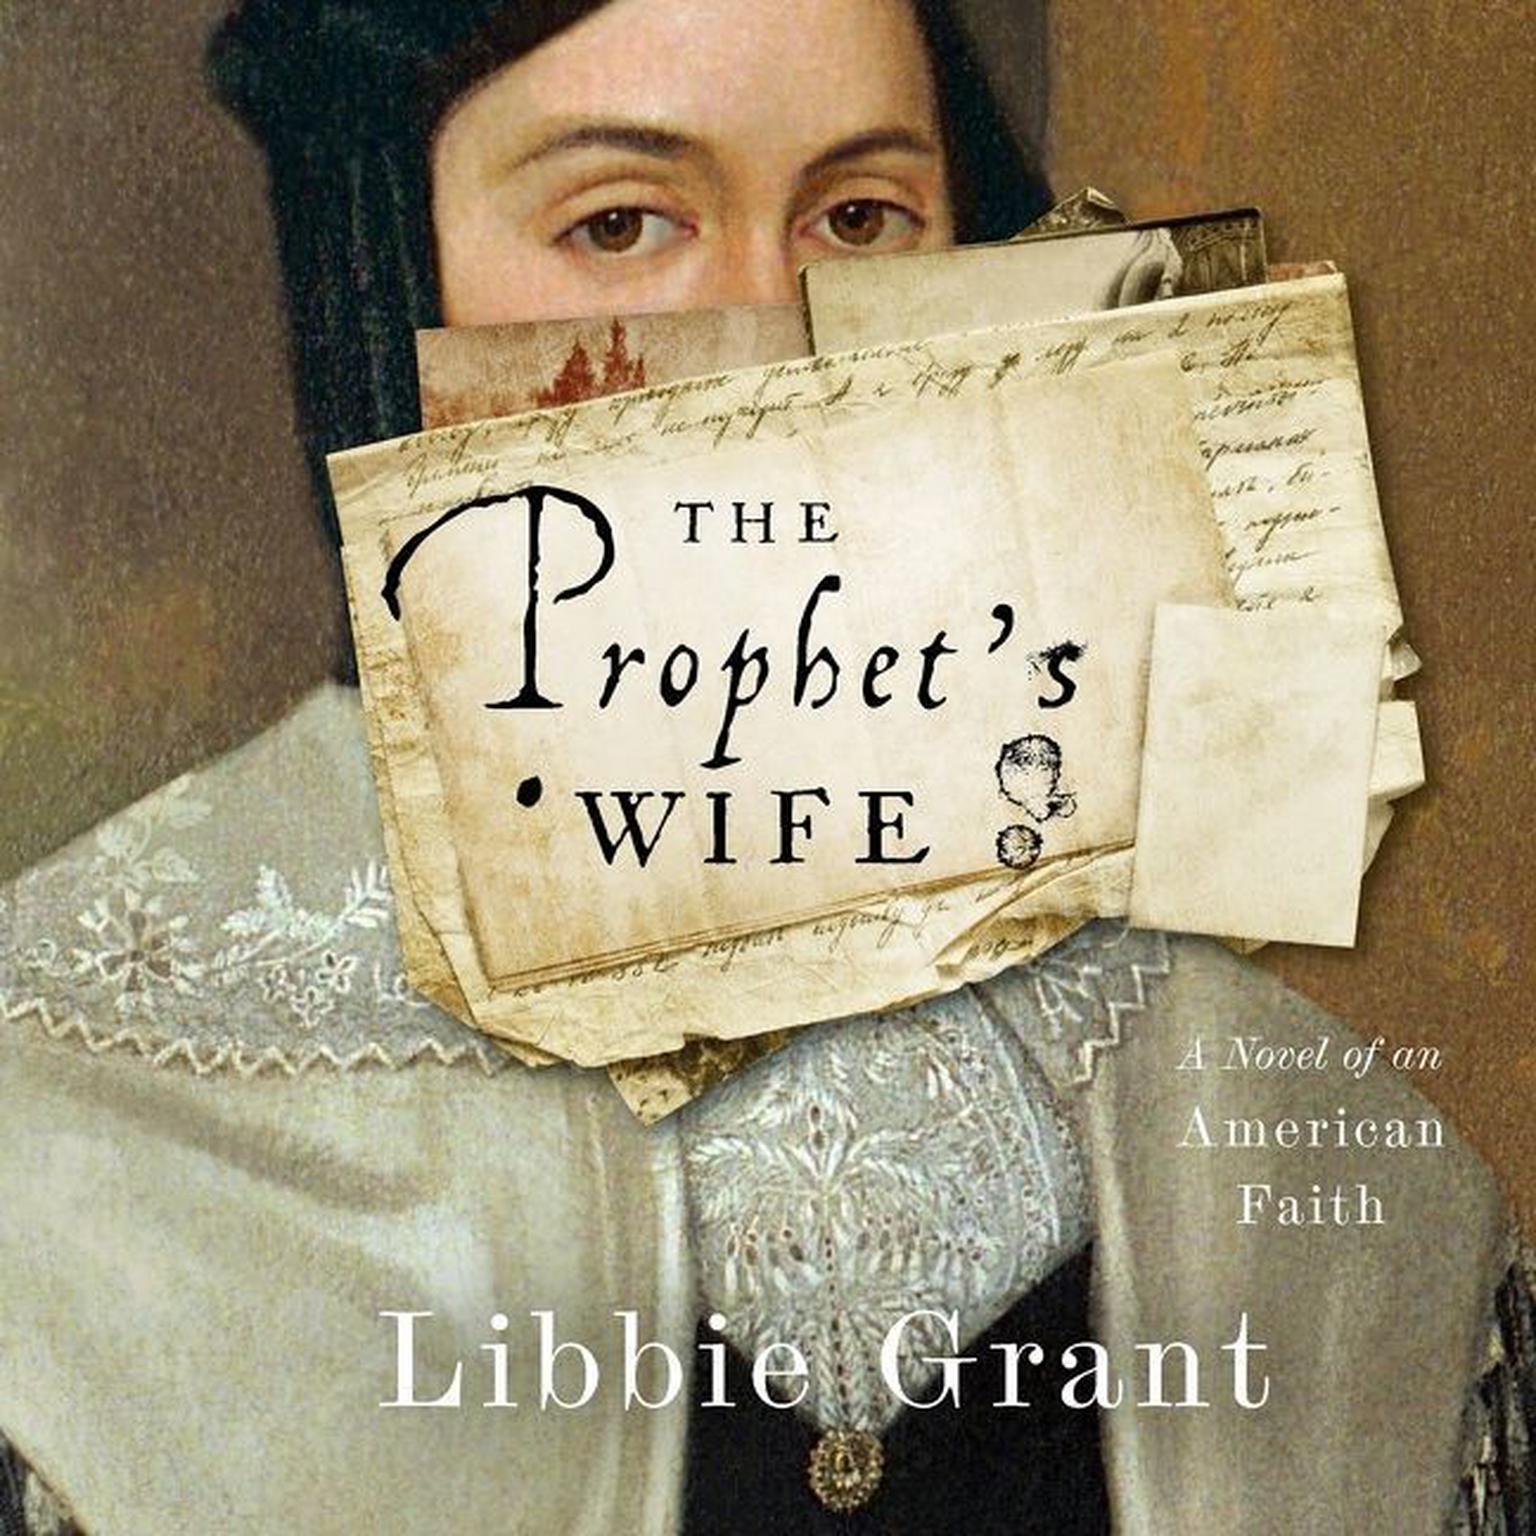 The Prophets Wife: A Novel of an American Faith Audiobook, by Libbie Grant